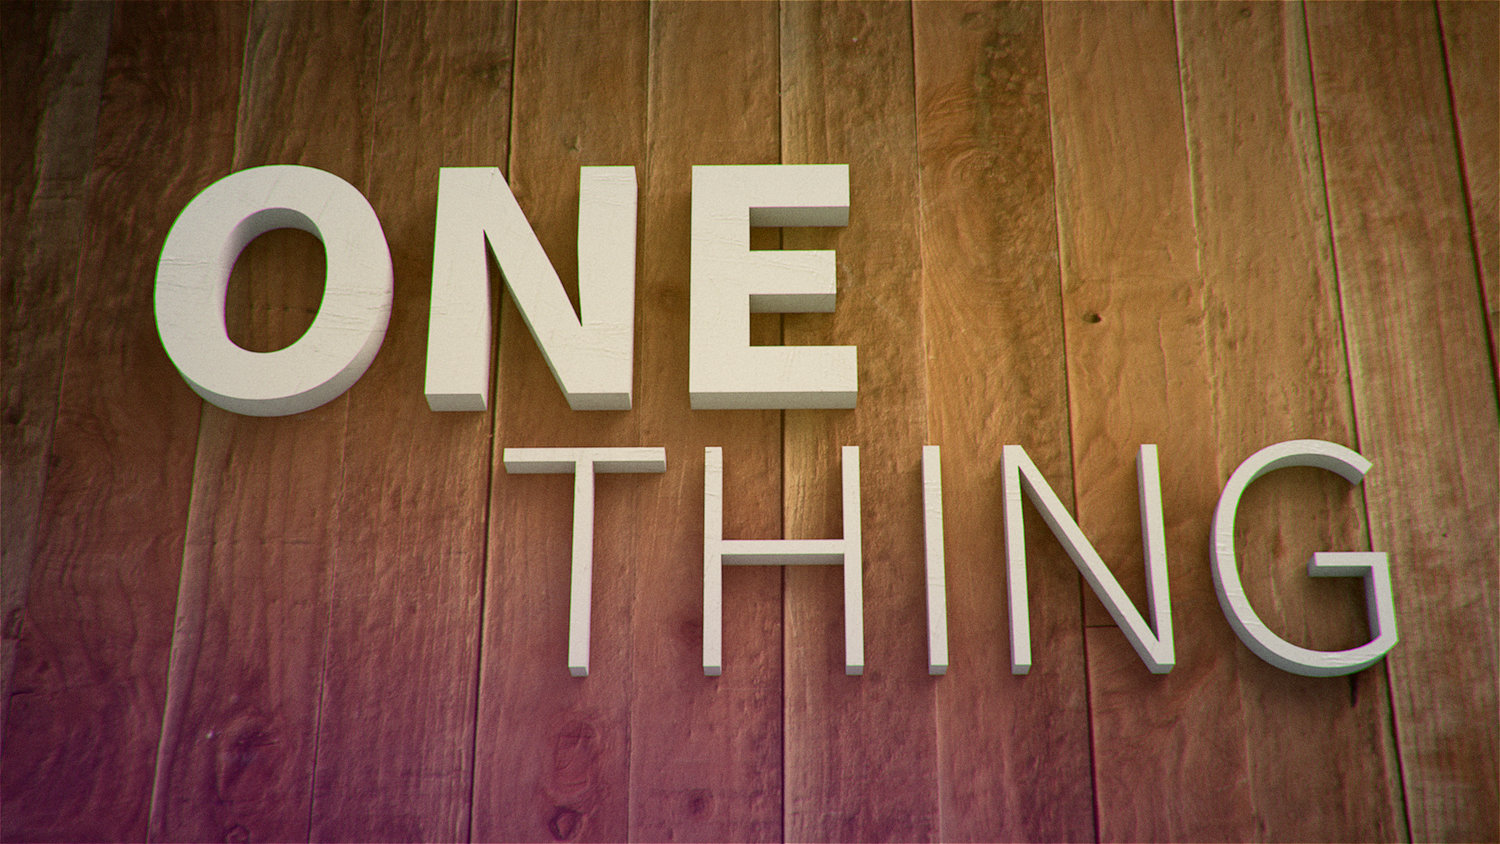 The 1 thing book. The one thing.